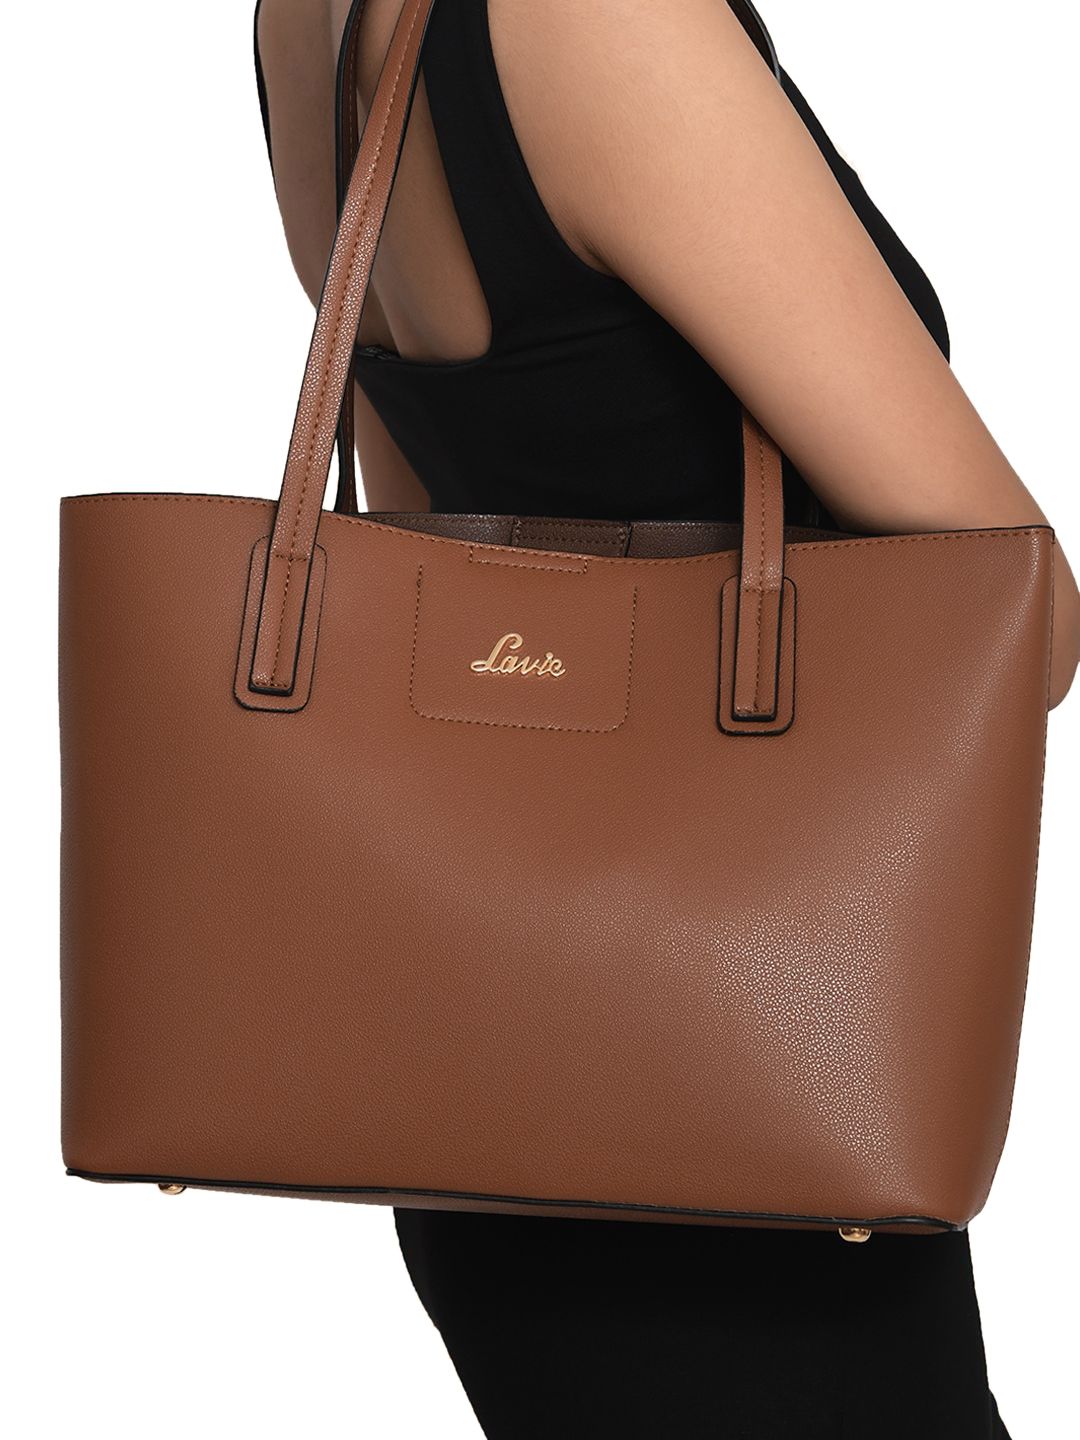 Lavie Duo Open Brown Solid Structured Shopper Tote Bag - Price History